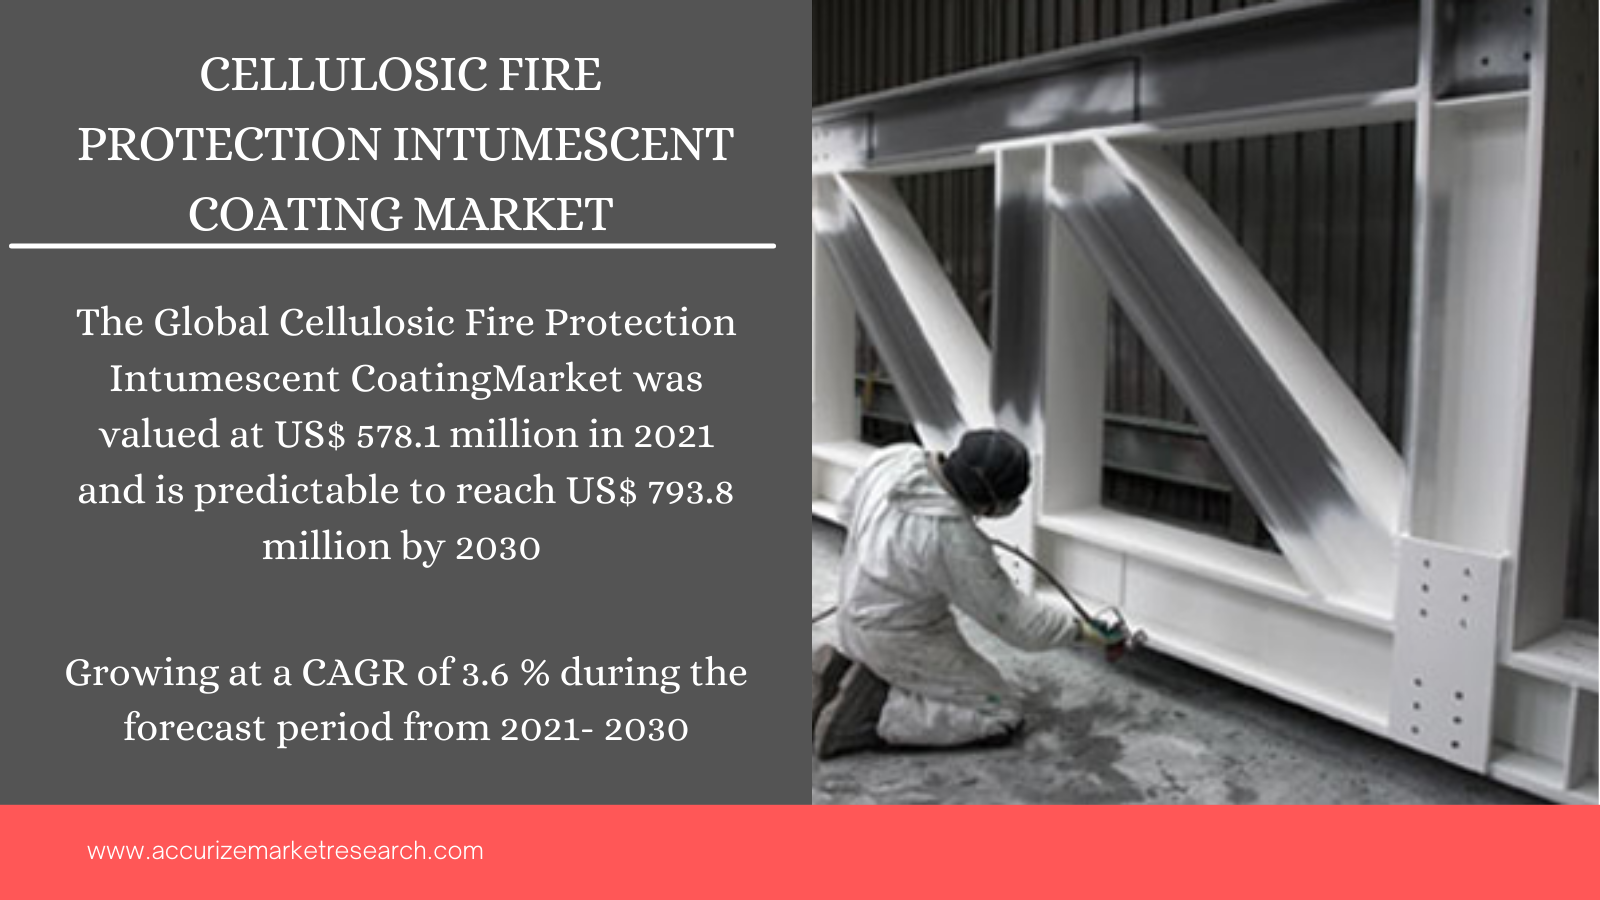 Global Cellulosic Fire Protection Intumescent Coating Market